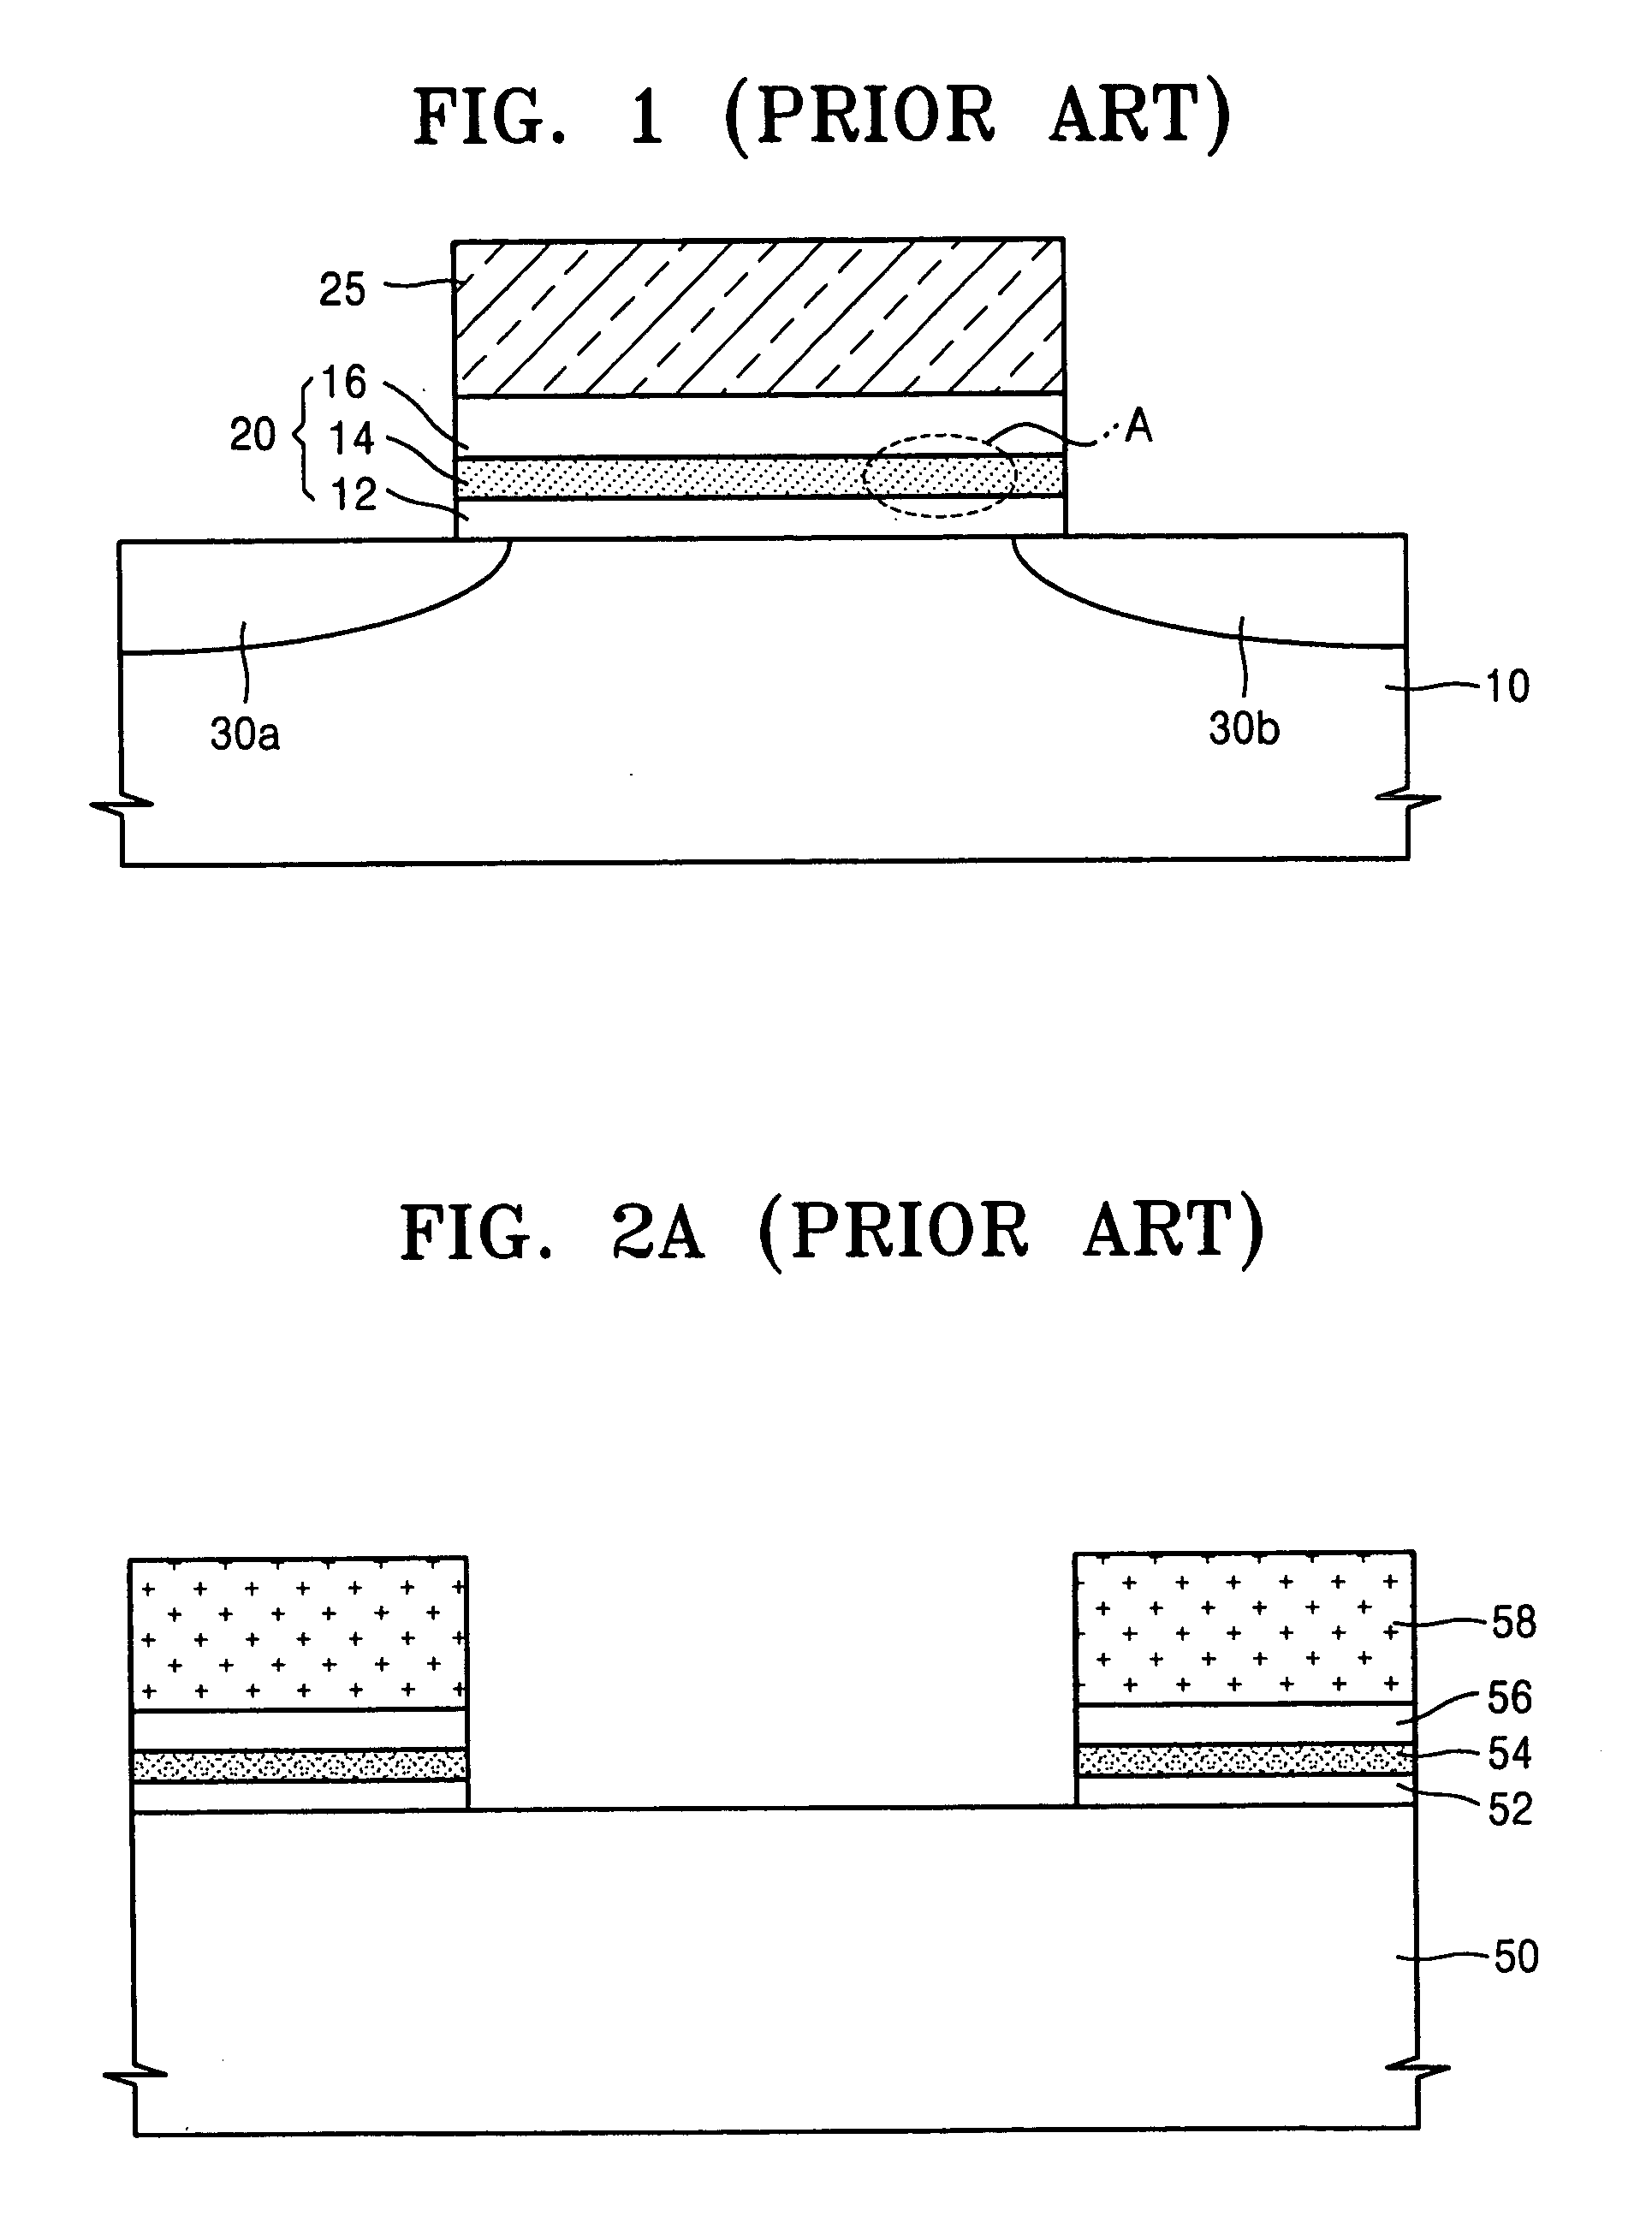 Local SONOS-type nonvolatile memory device and method of manufacturing the same